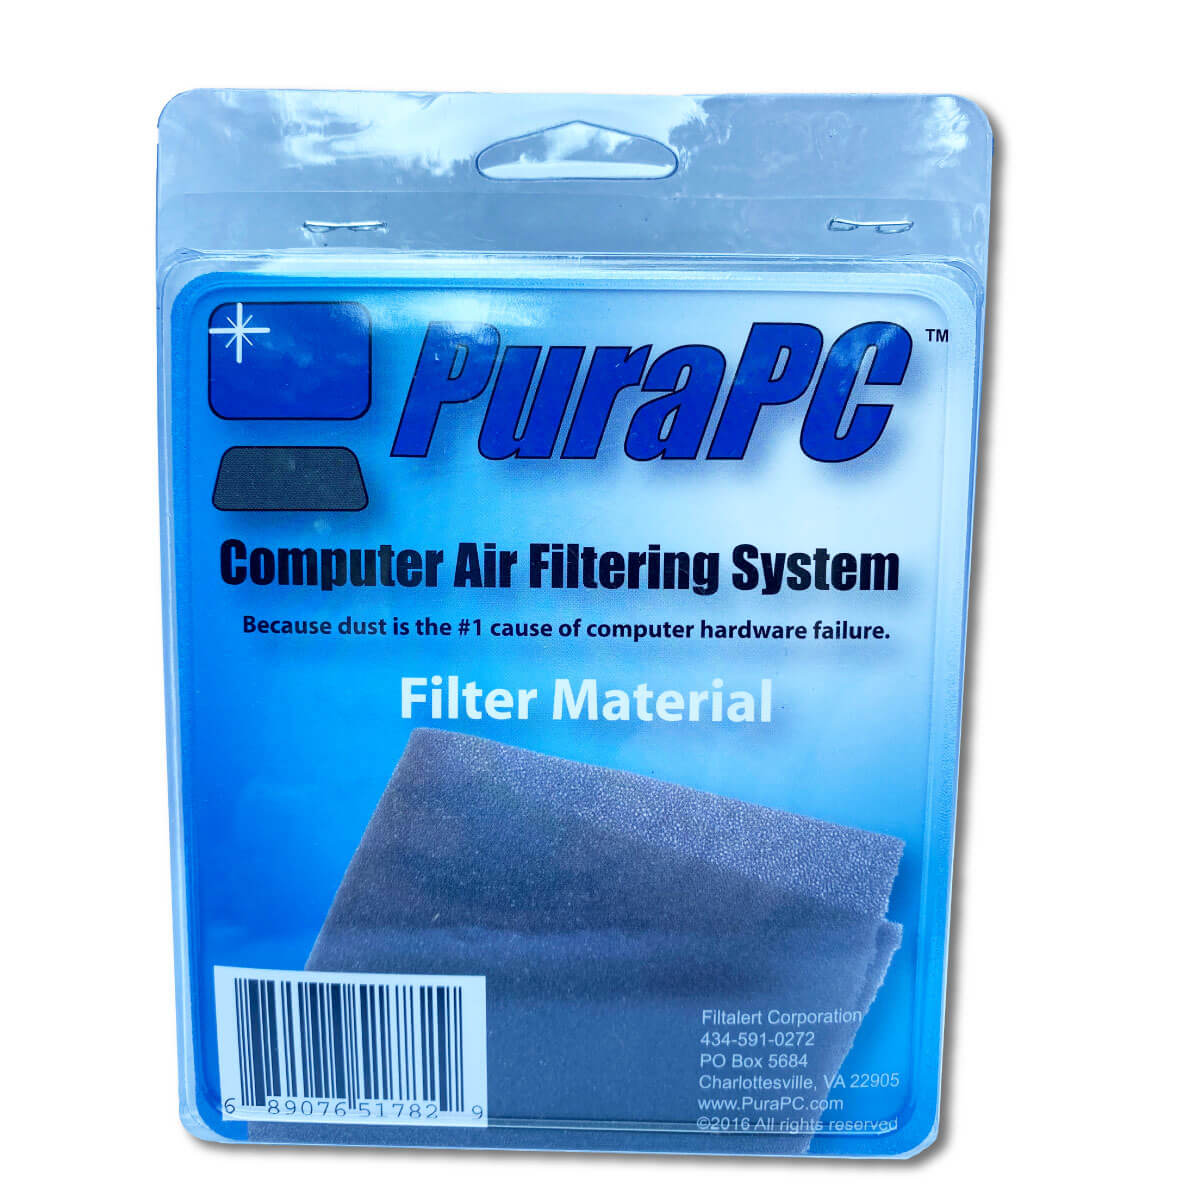 PuraPC One Square Foot Filter Material 60 PPI